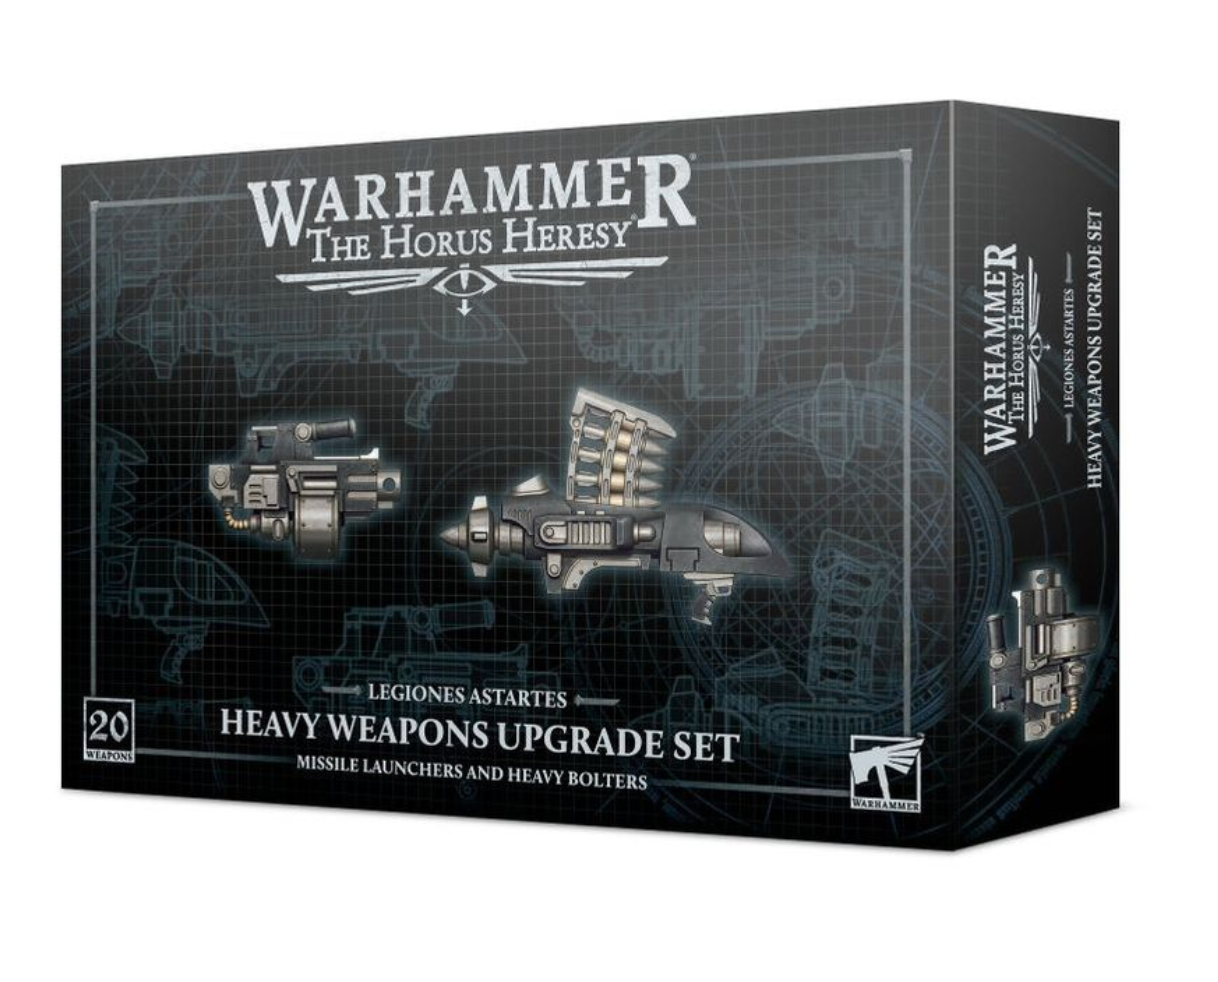 Games Workshop Warhammer The Horus Heresy Heavy Weapons Upgrade - Missile Launchers and Heavy Bolters